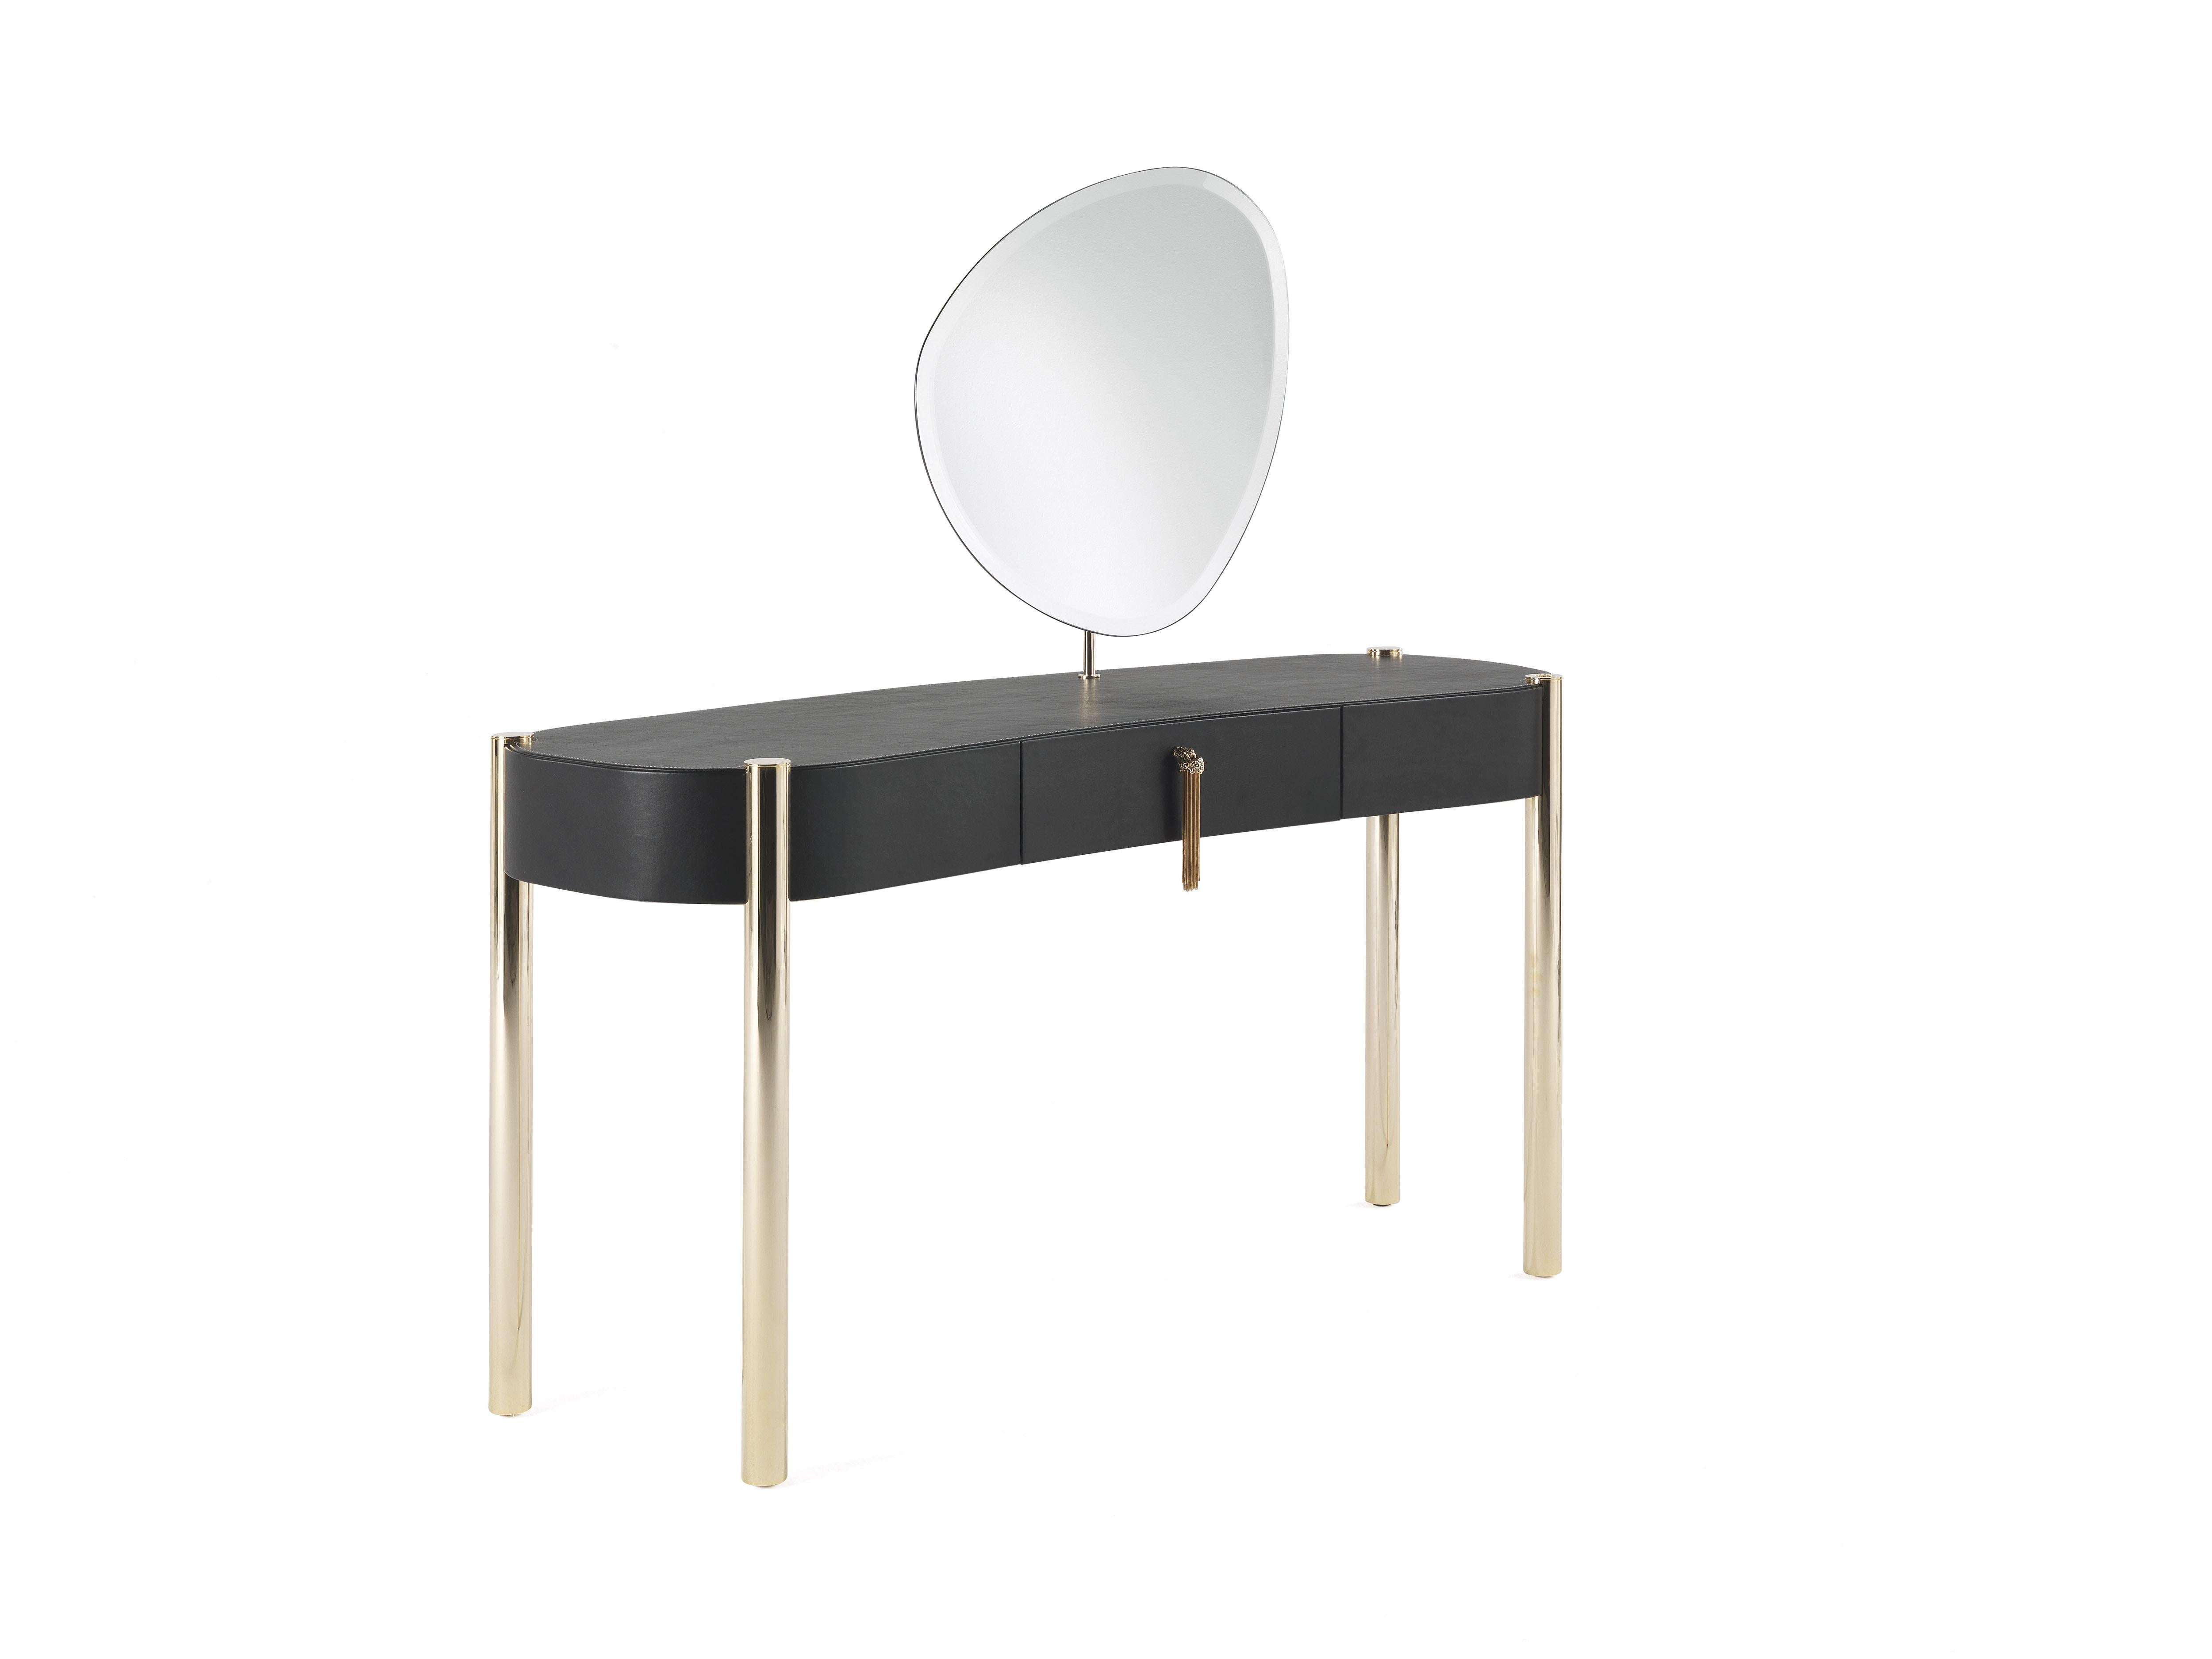 Trinidad Dressing table with mirror with structure in multi-layer wood covered with leather CAT.A Sauvage COL. Black. Inside finishing in microfiber. Metal legs in gold finishing. “Jewel handle” in cast brass gold finishing. Oval natural mirror.
 